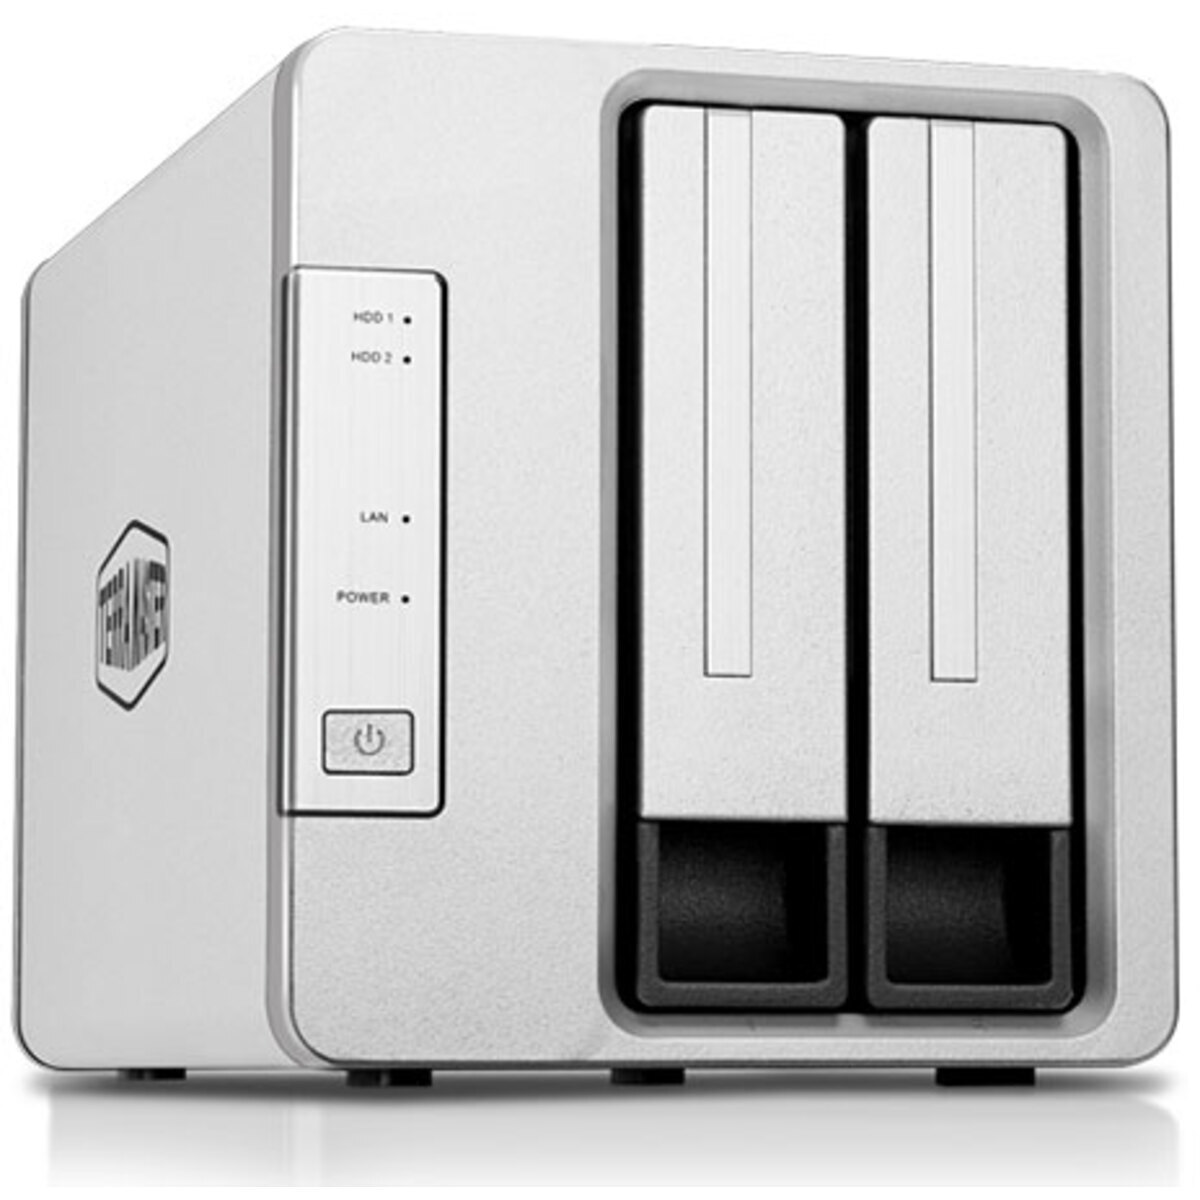 TerraMaster F2-223 12tb 2-Bay Desktop Personal / Basic Home / Small Office NAS - Network Attached Storage Device 2x6tb Western Digital Ultrastar DC HC310 HUS726T6TALE6L4 3.5 7200rpm SATA 6Gb/s HDD ENTERPRISE Class Drives Installed - Burn-In Tested - FREE RAM UPGRADE F2-223